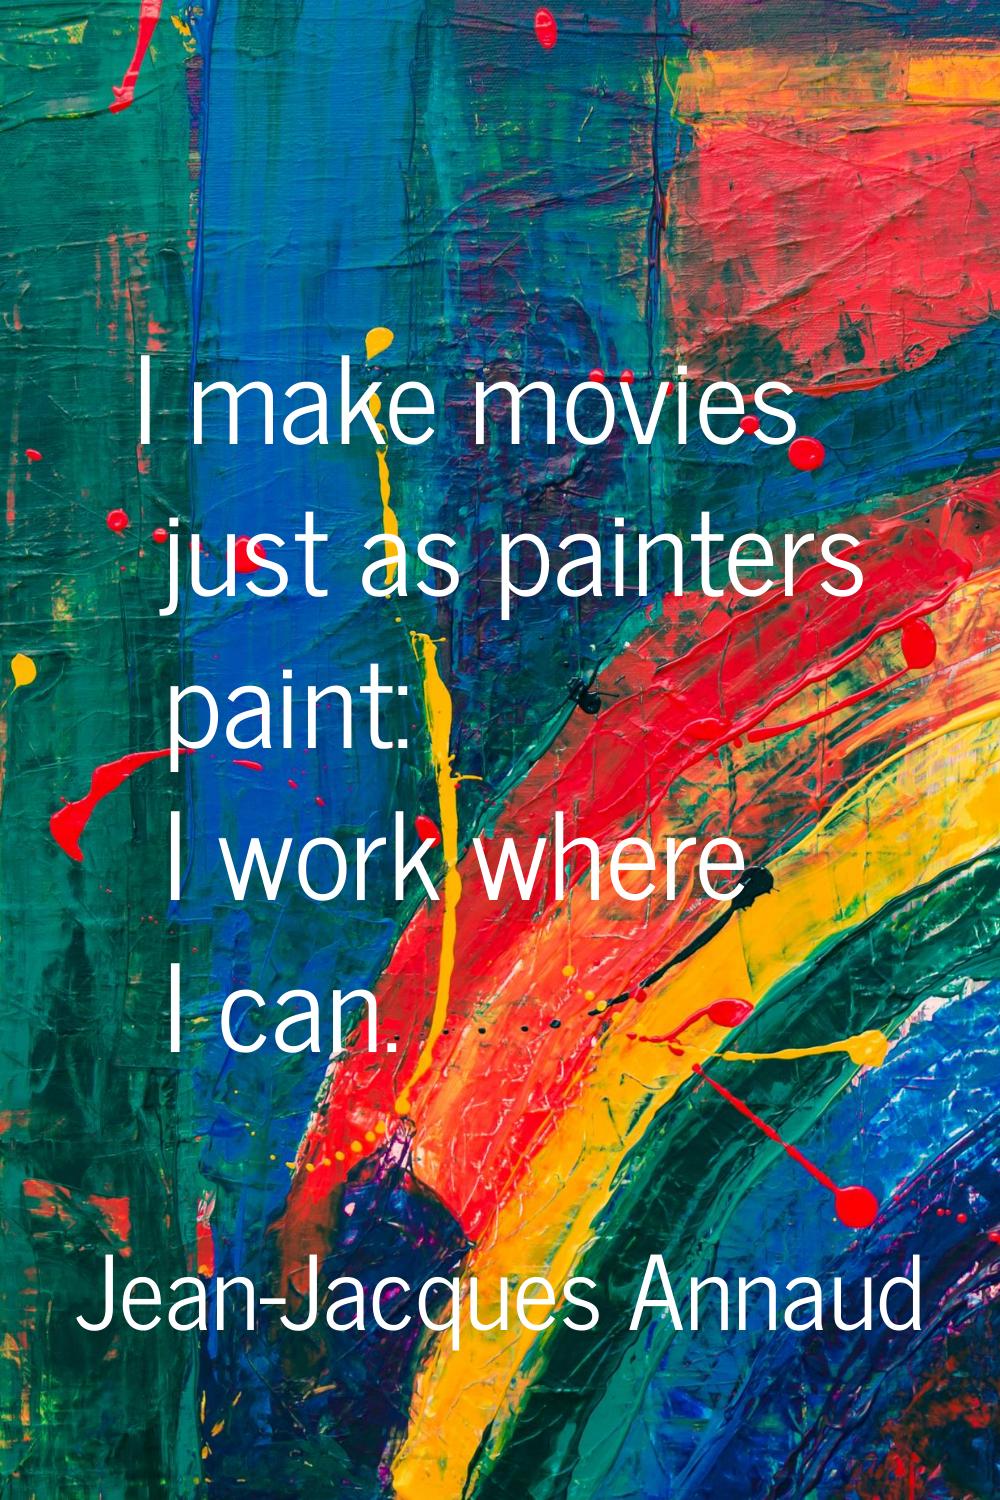 I make movies just as painters paint: I work where I can.